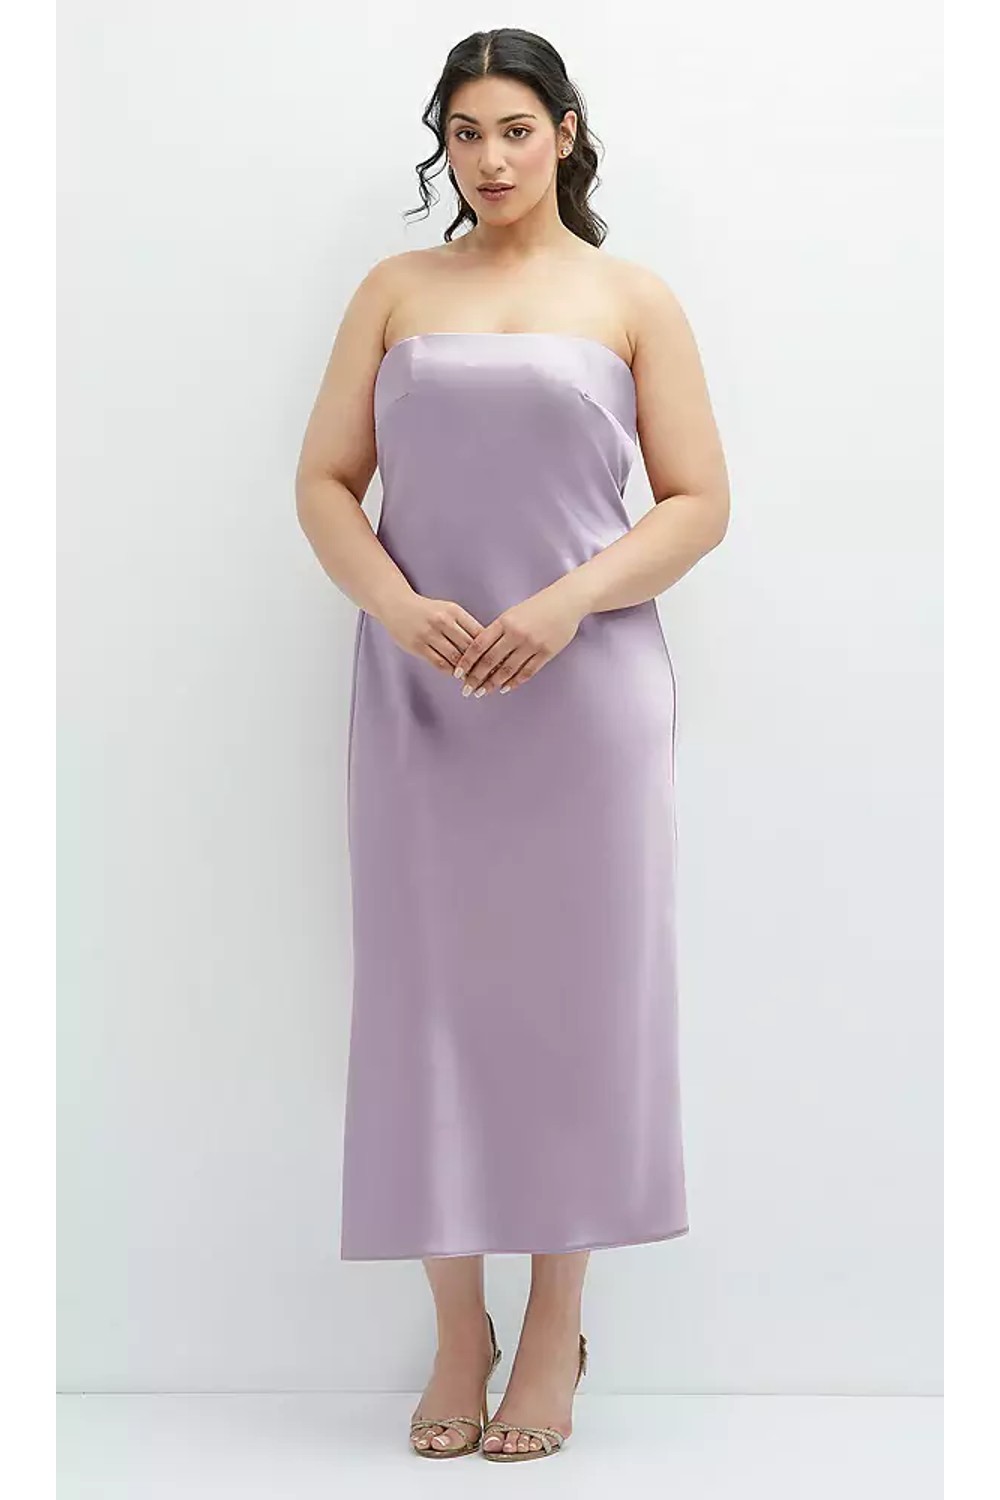 Try Before You Buy Goldie Bridesmaid Dress by Dessy